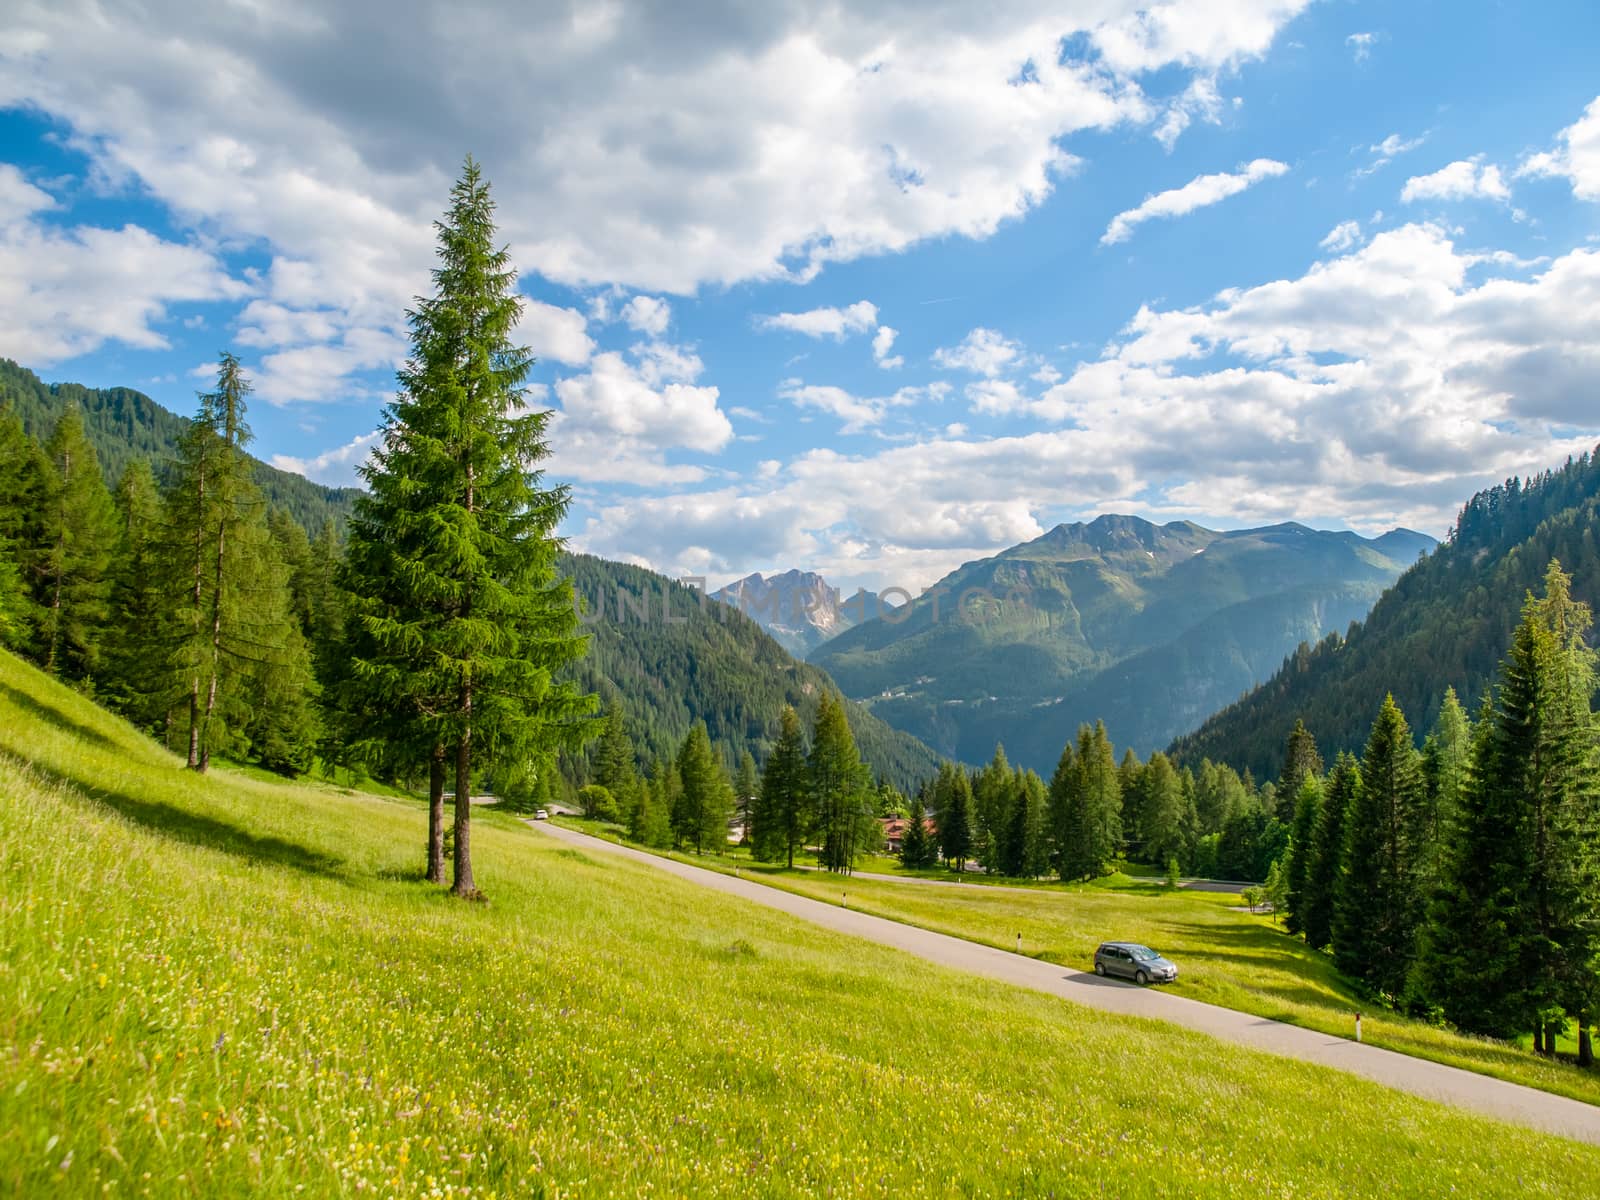 Landscape of Dolomites with green meadows, coniferous trees, blue sky, white clouds and rocky mountains.